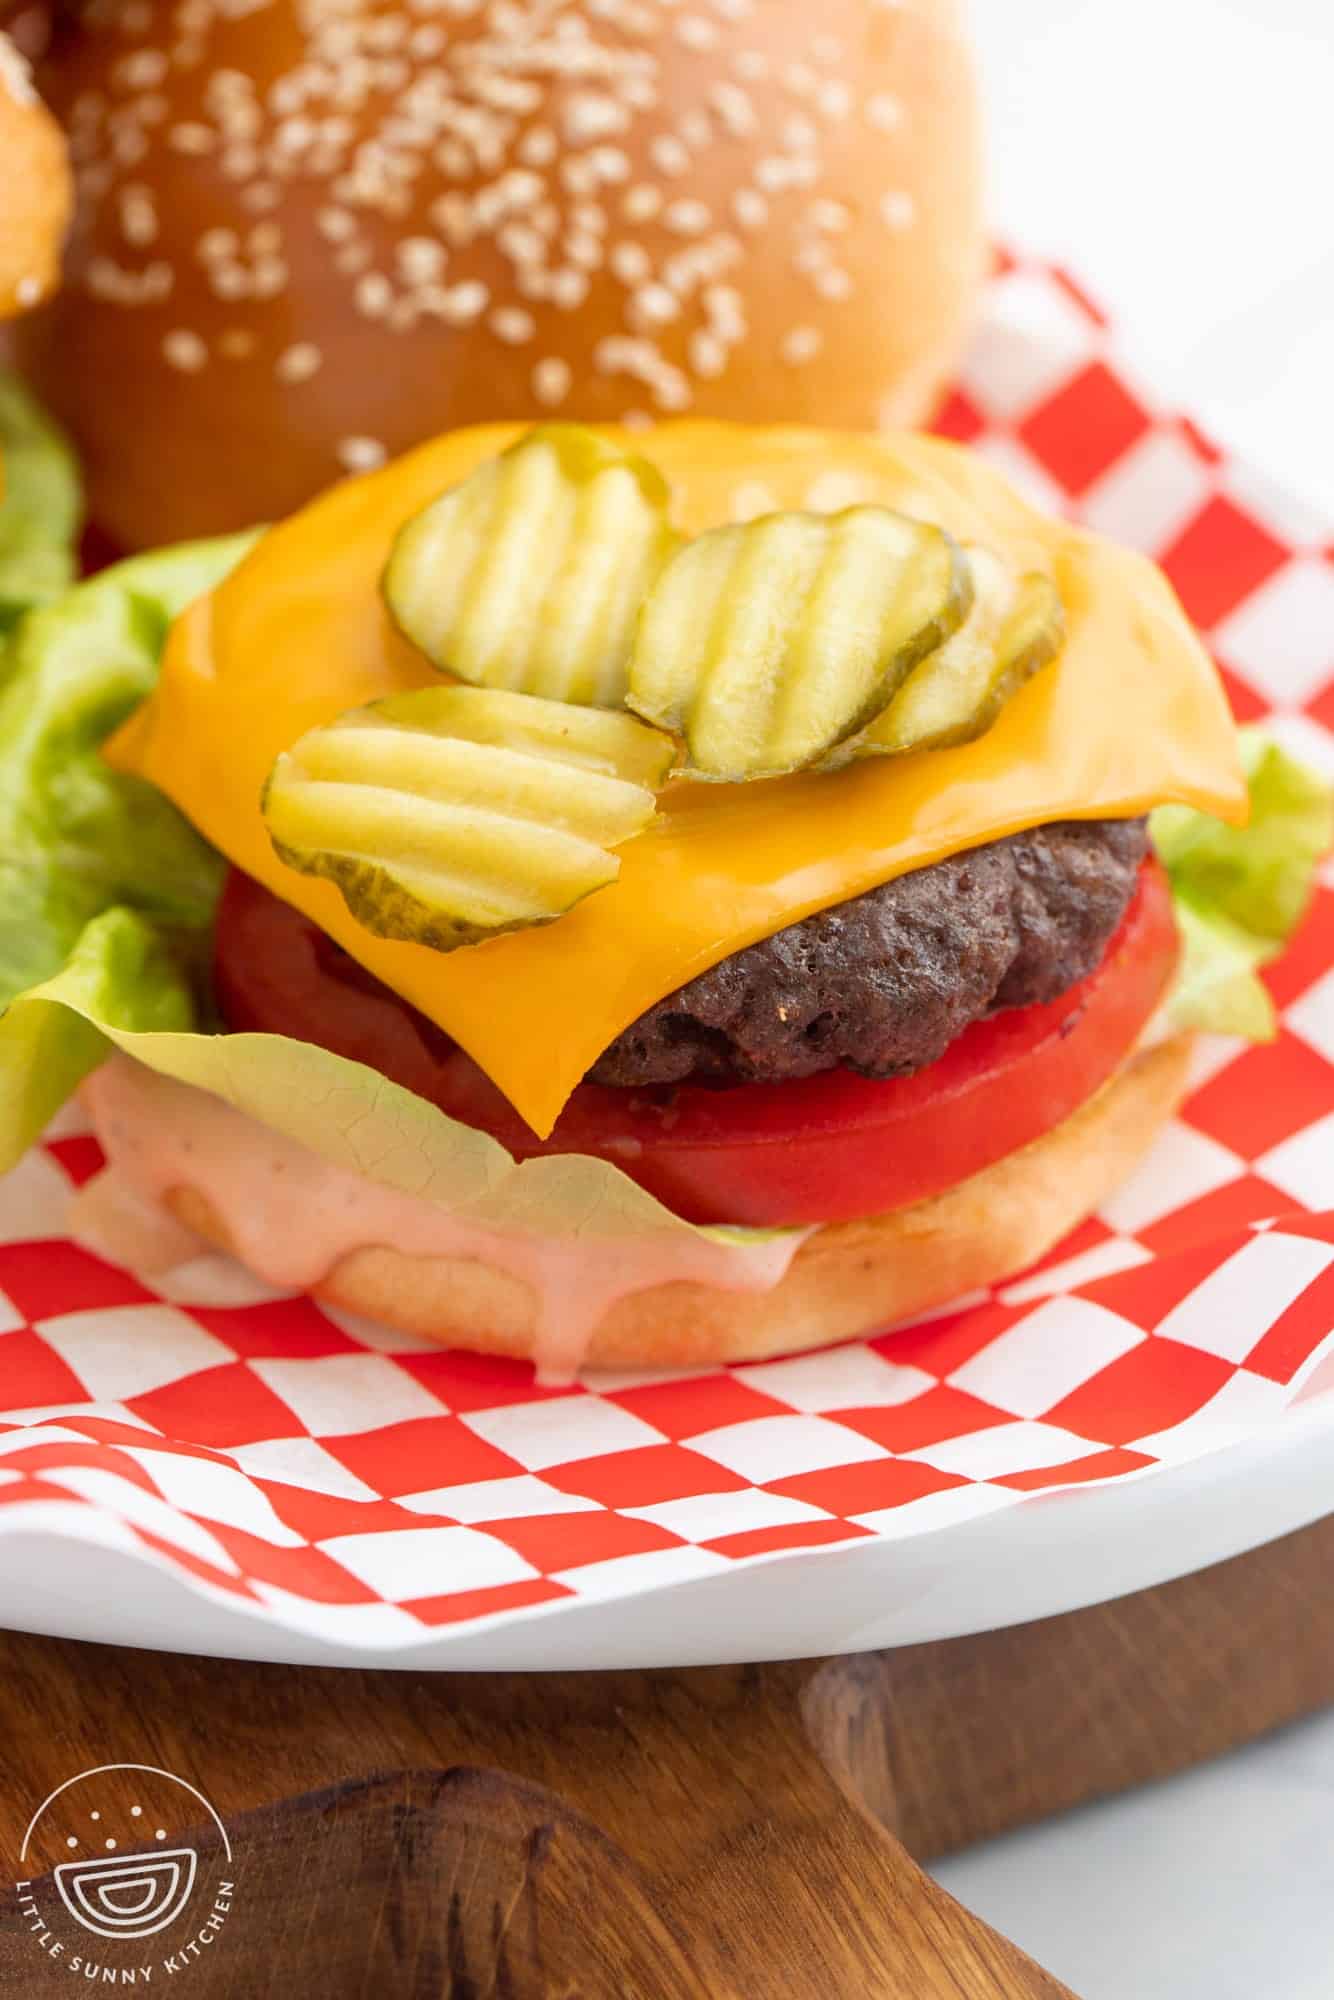 Hamburger made with beef patty, cheese, onion, tomato, lettuce, and pickle chips.